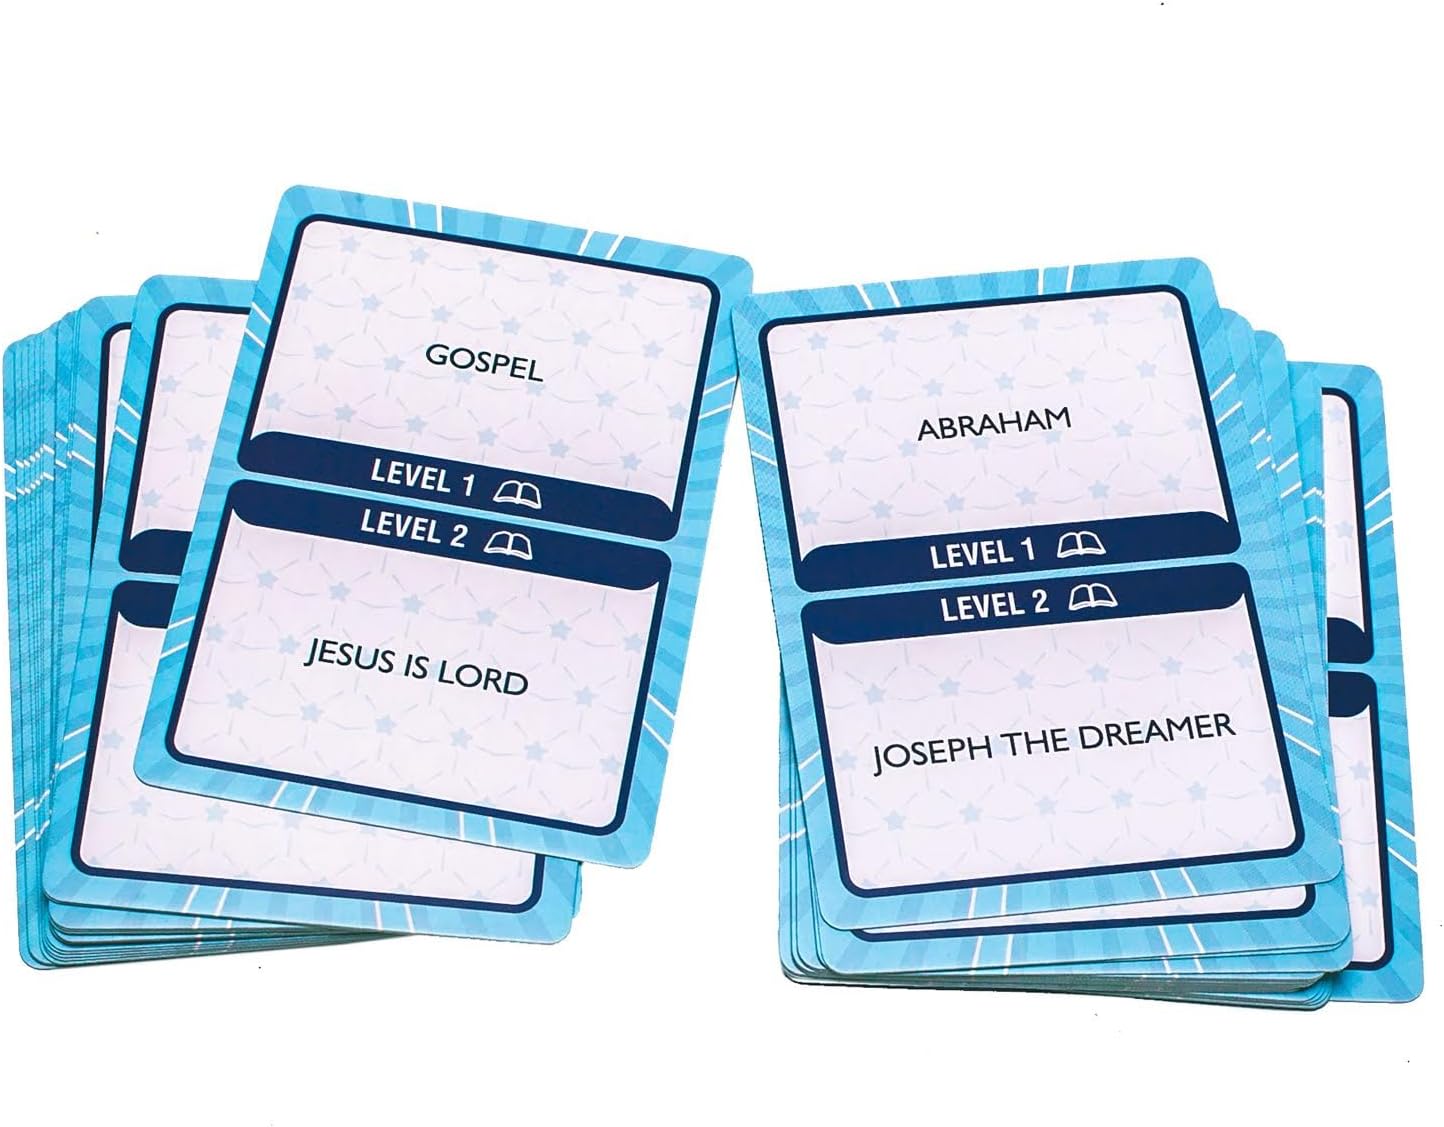 Christian Charades - The Game of Guessing Charades Words about God, Christianity and the Bible as a Whole. claimedbygoddesigns